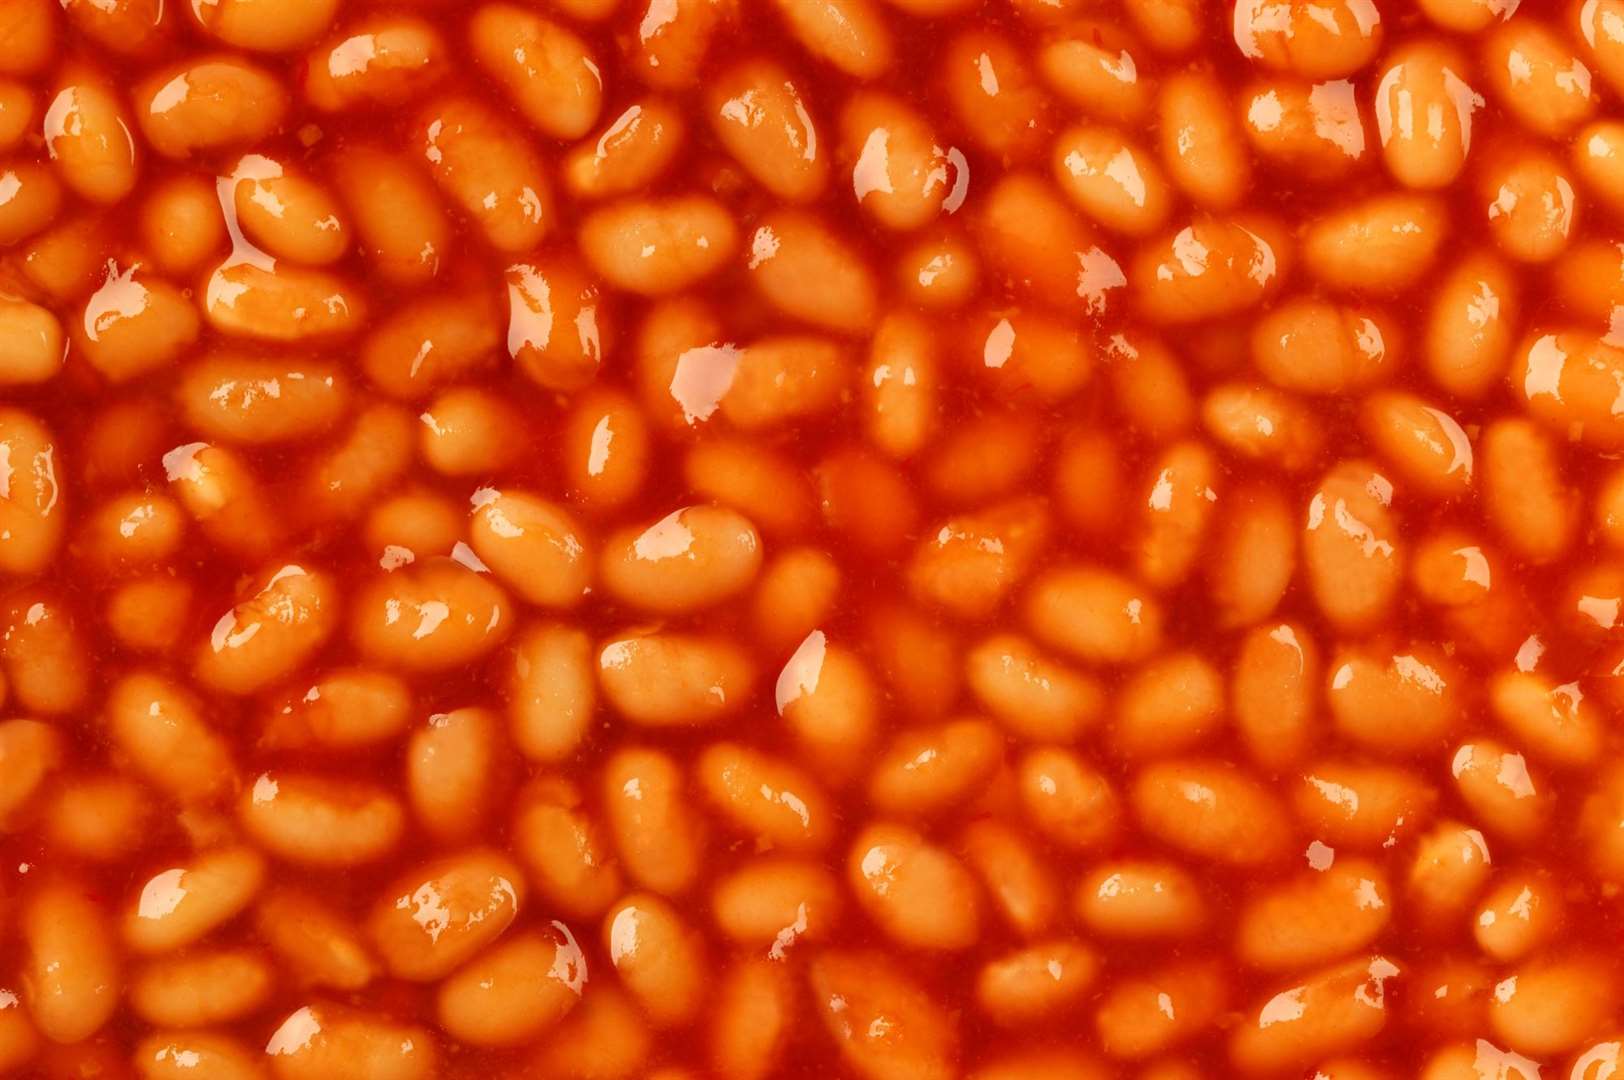 Beans made for companies including Branston, Asda, Tesco and Sainsbury’s are being recalled. Image: iStock.